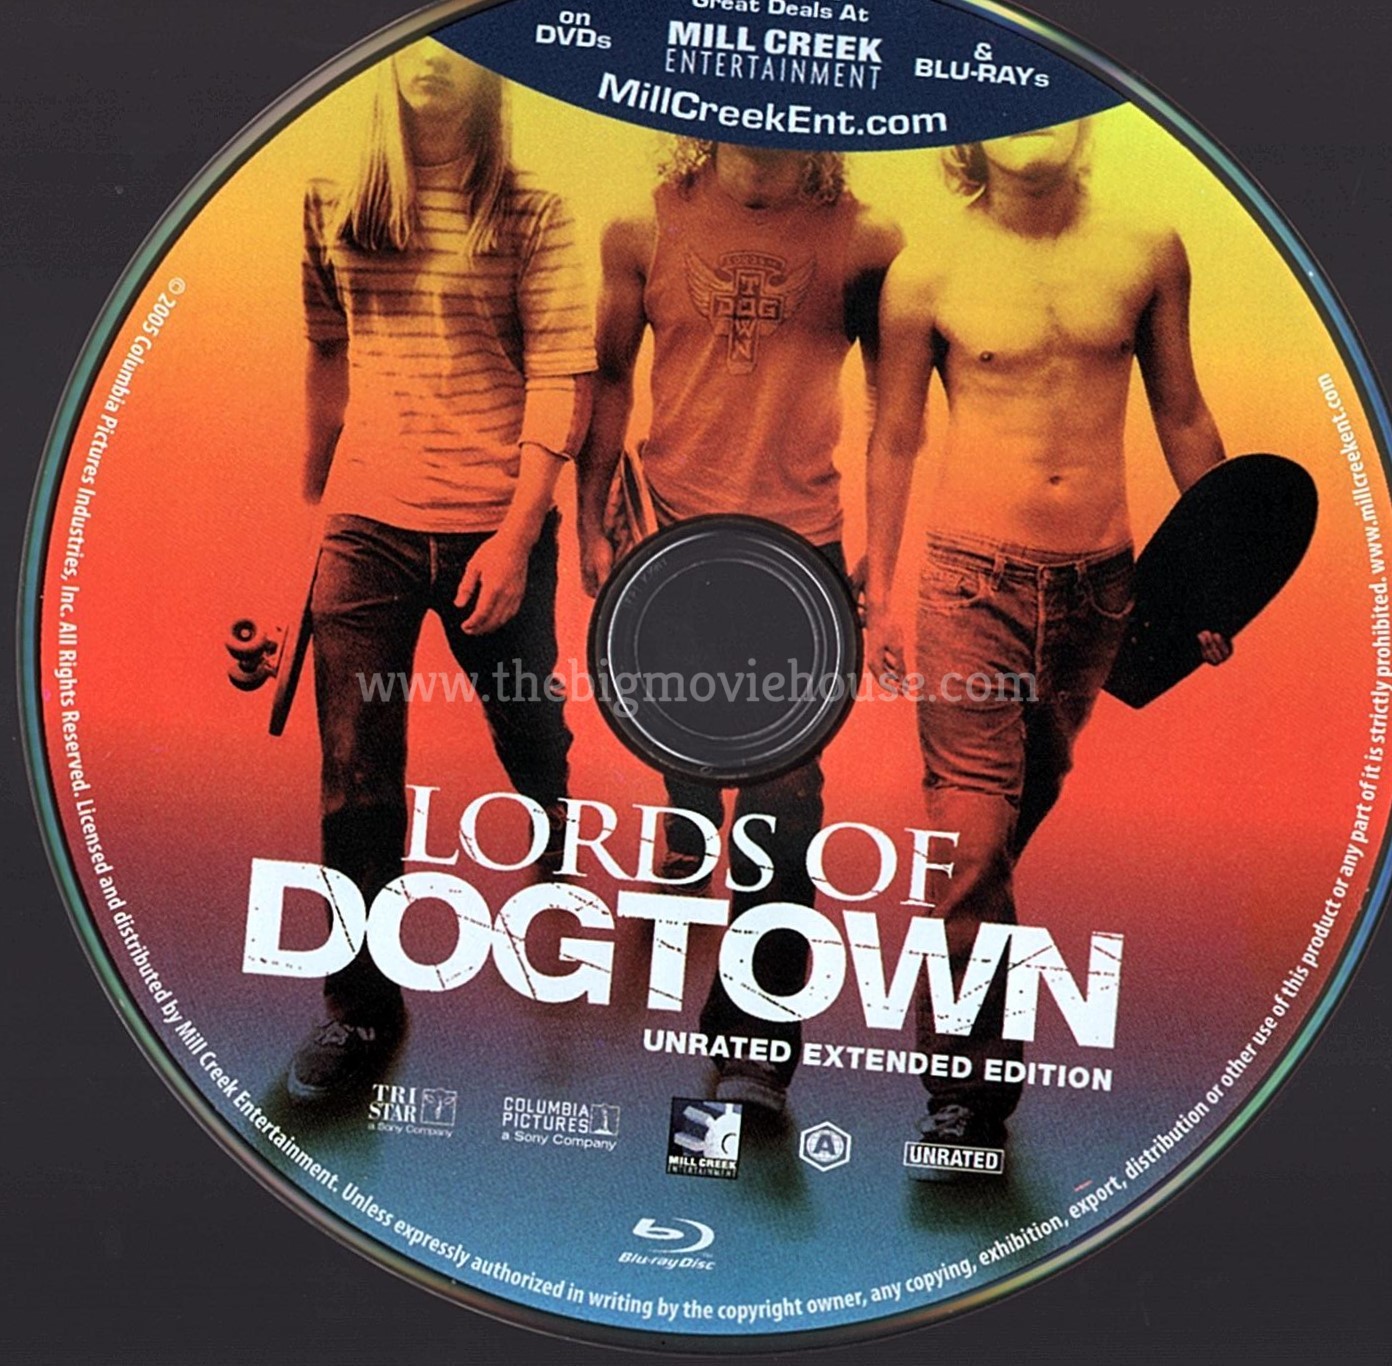 Lords of Dogtown Blu-ray review